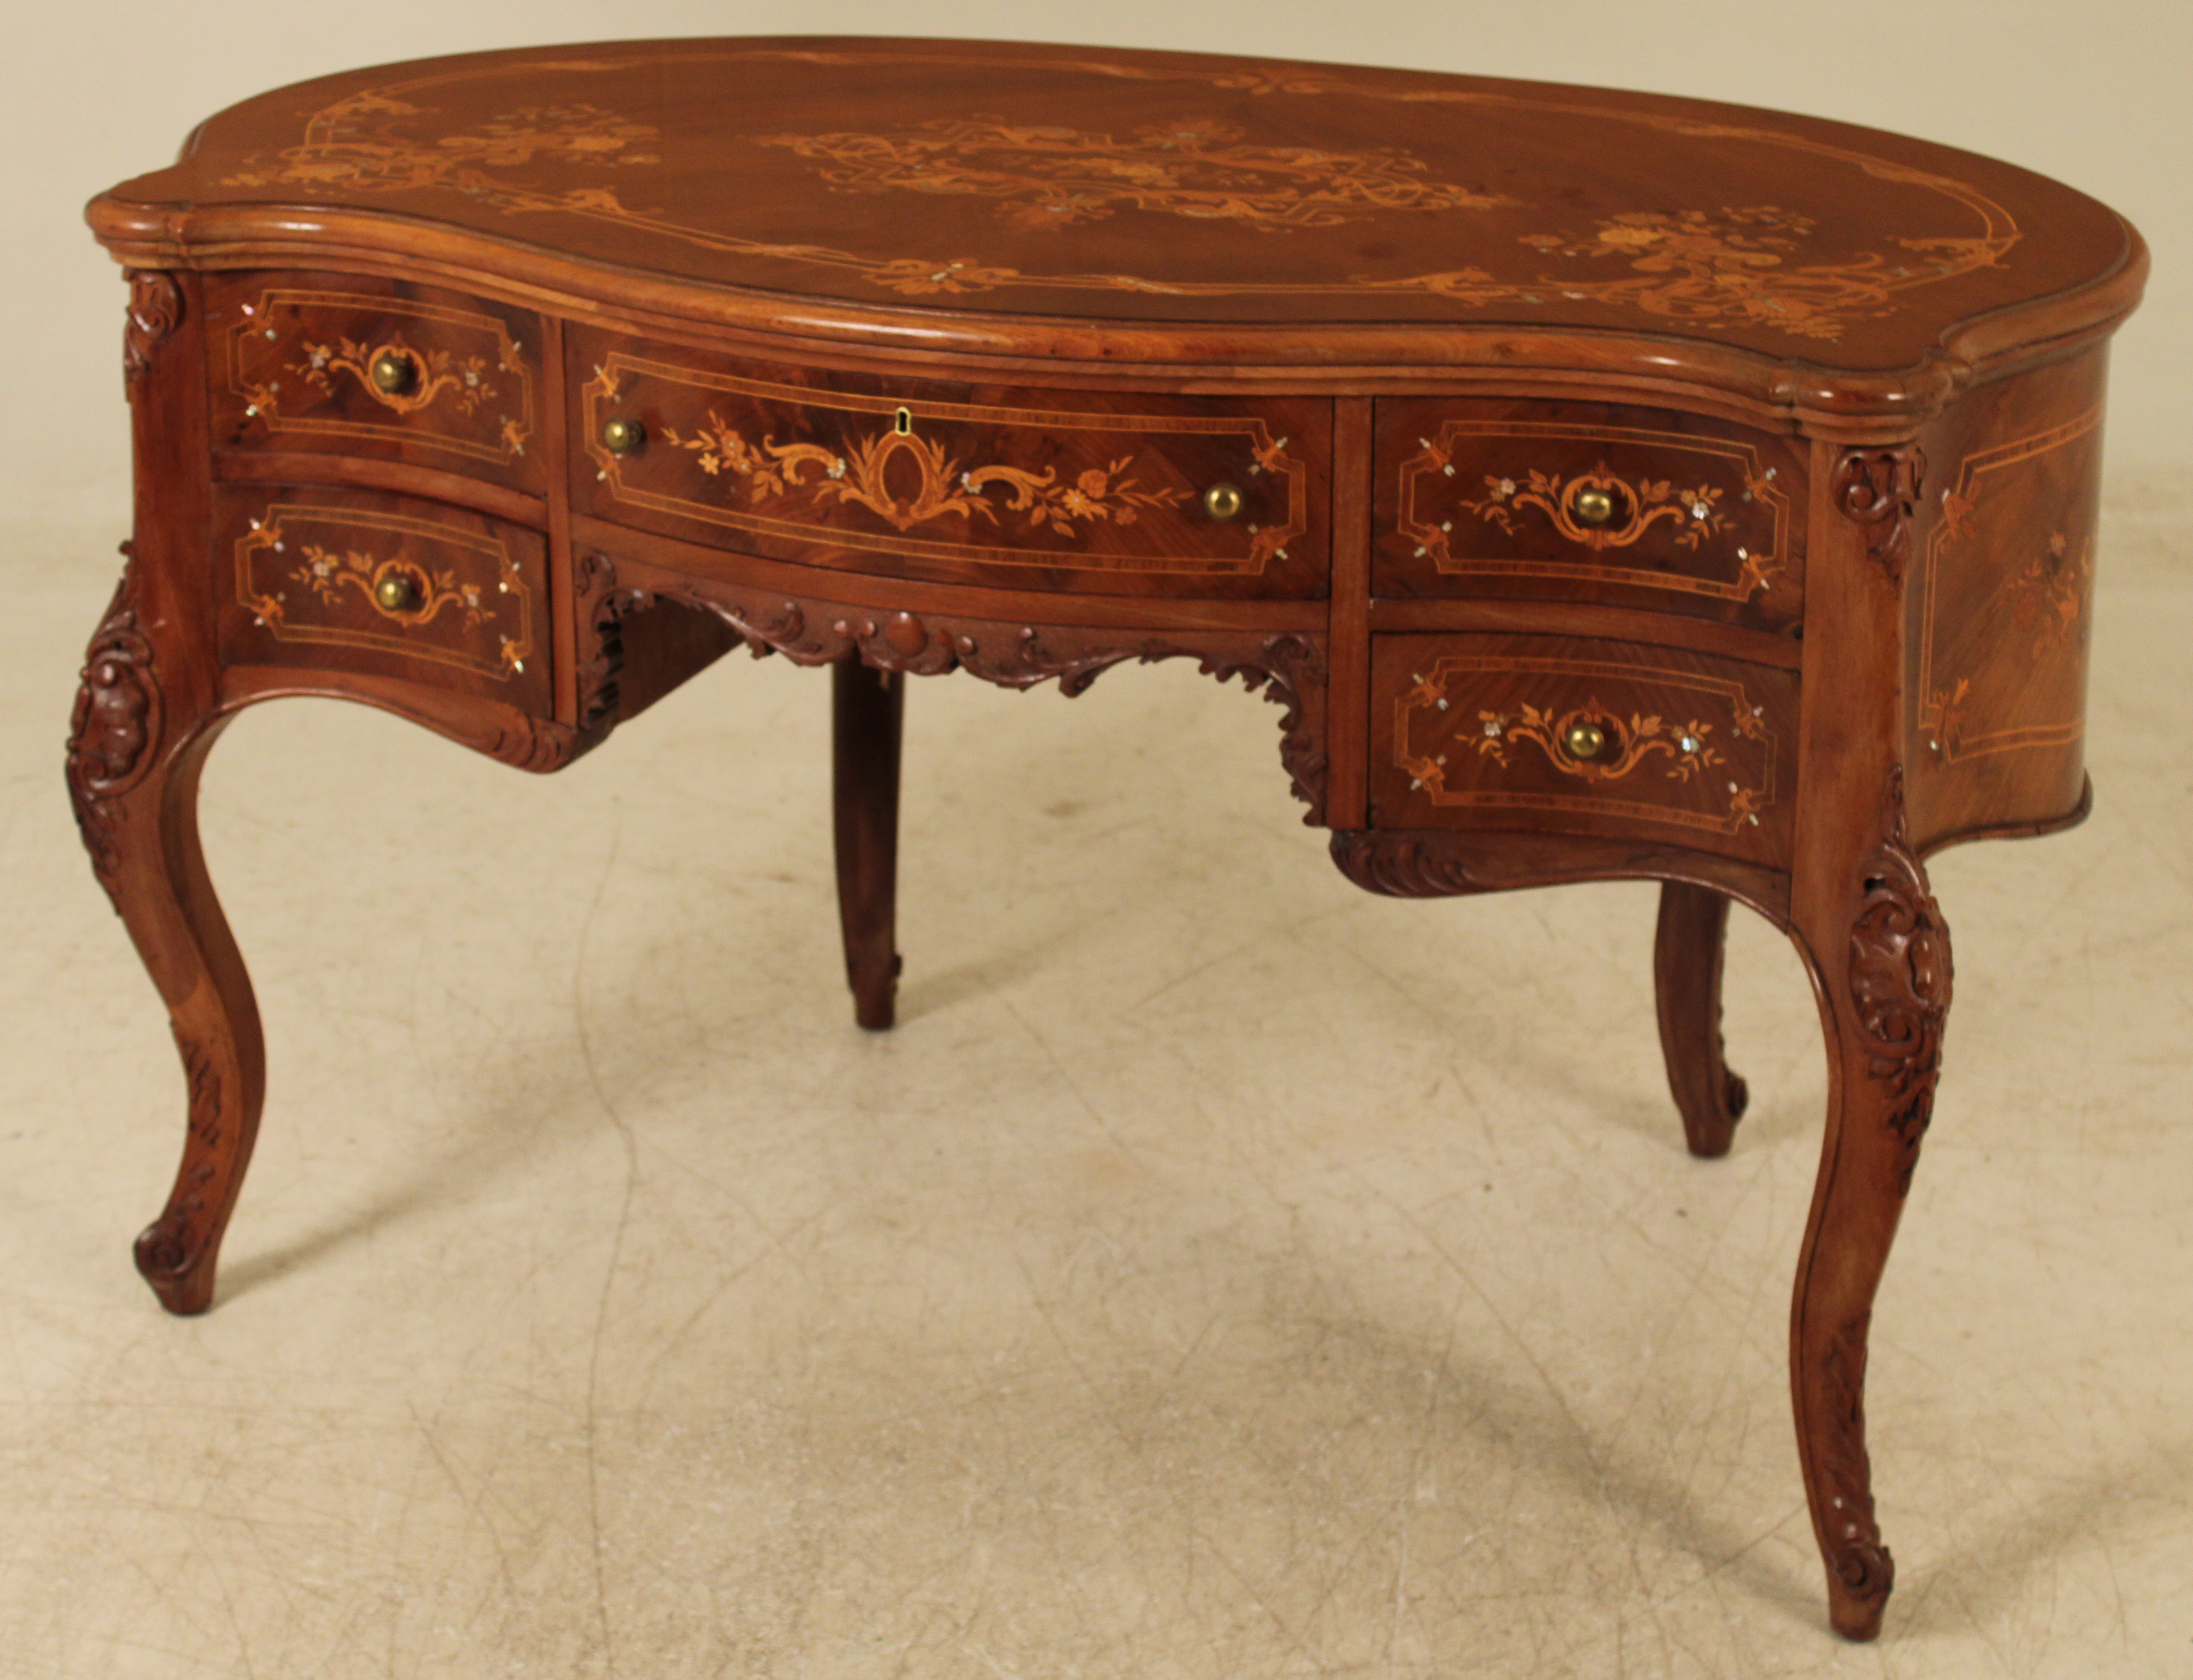 LOUIS XV STYLE MARQUETRY INLAID 35f5f0